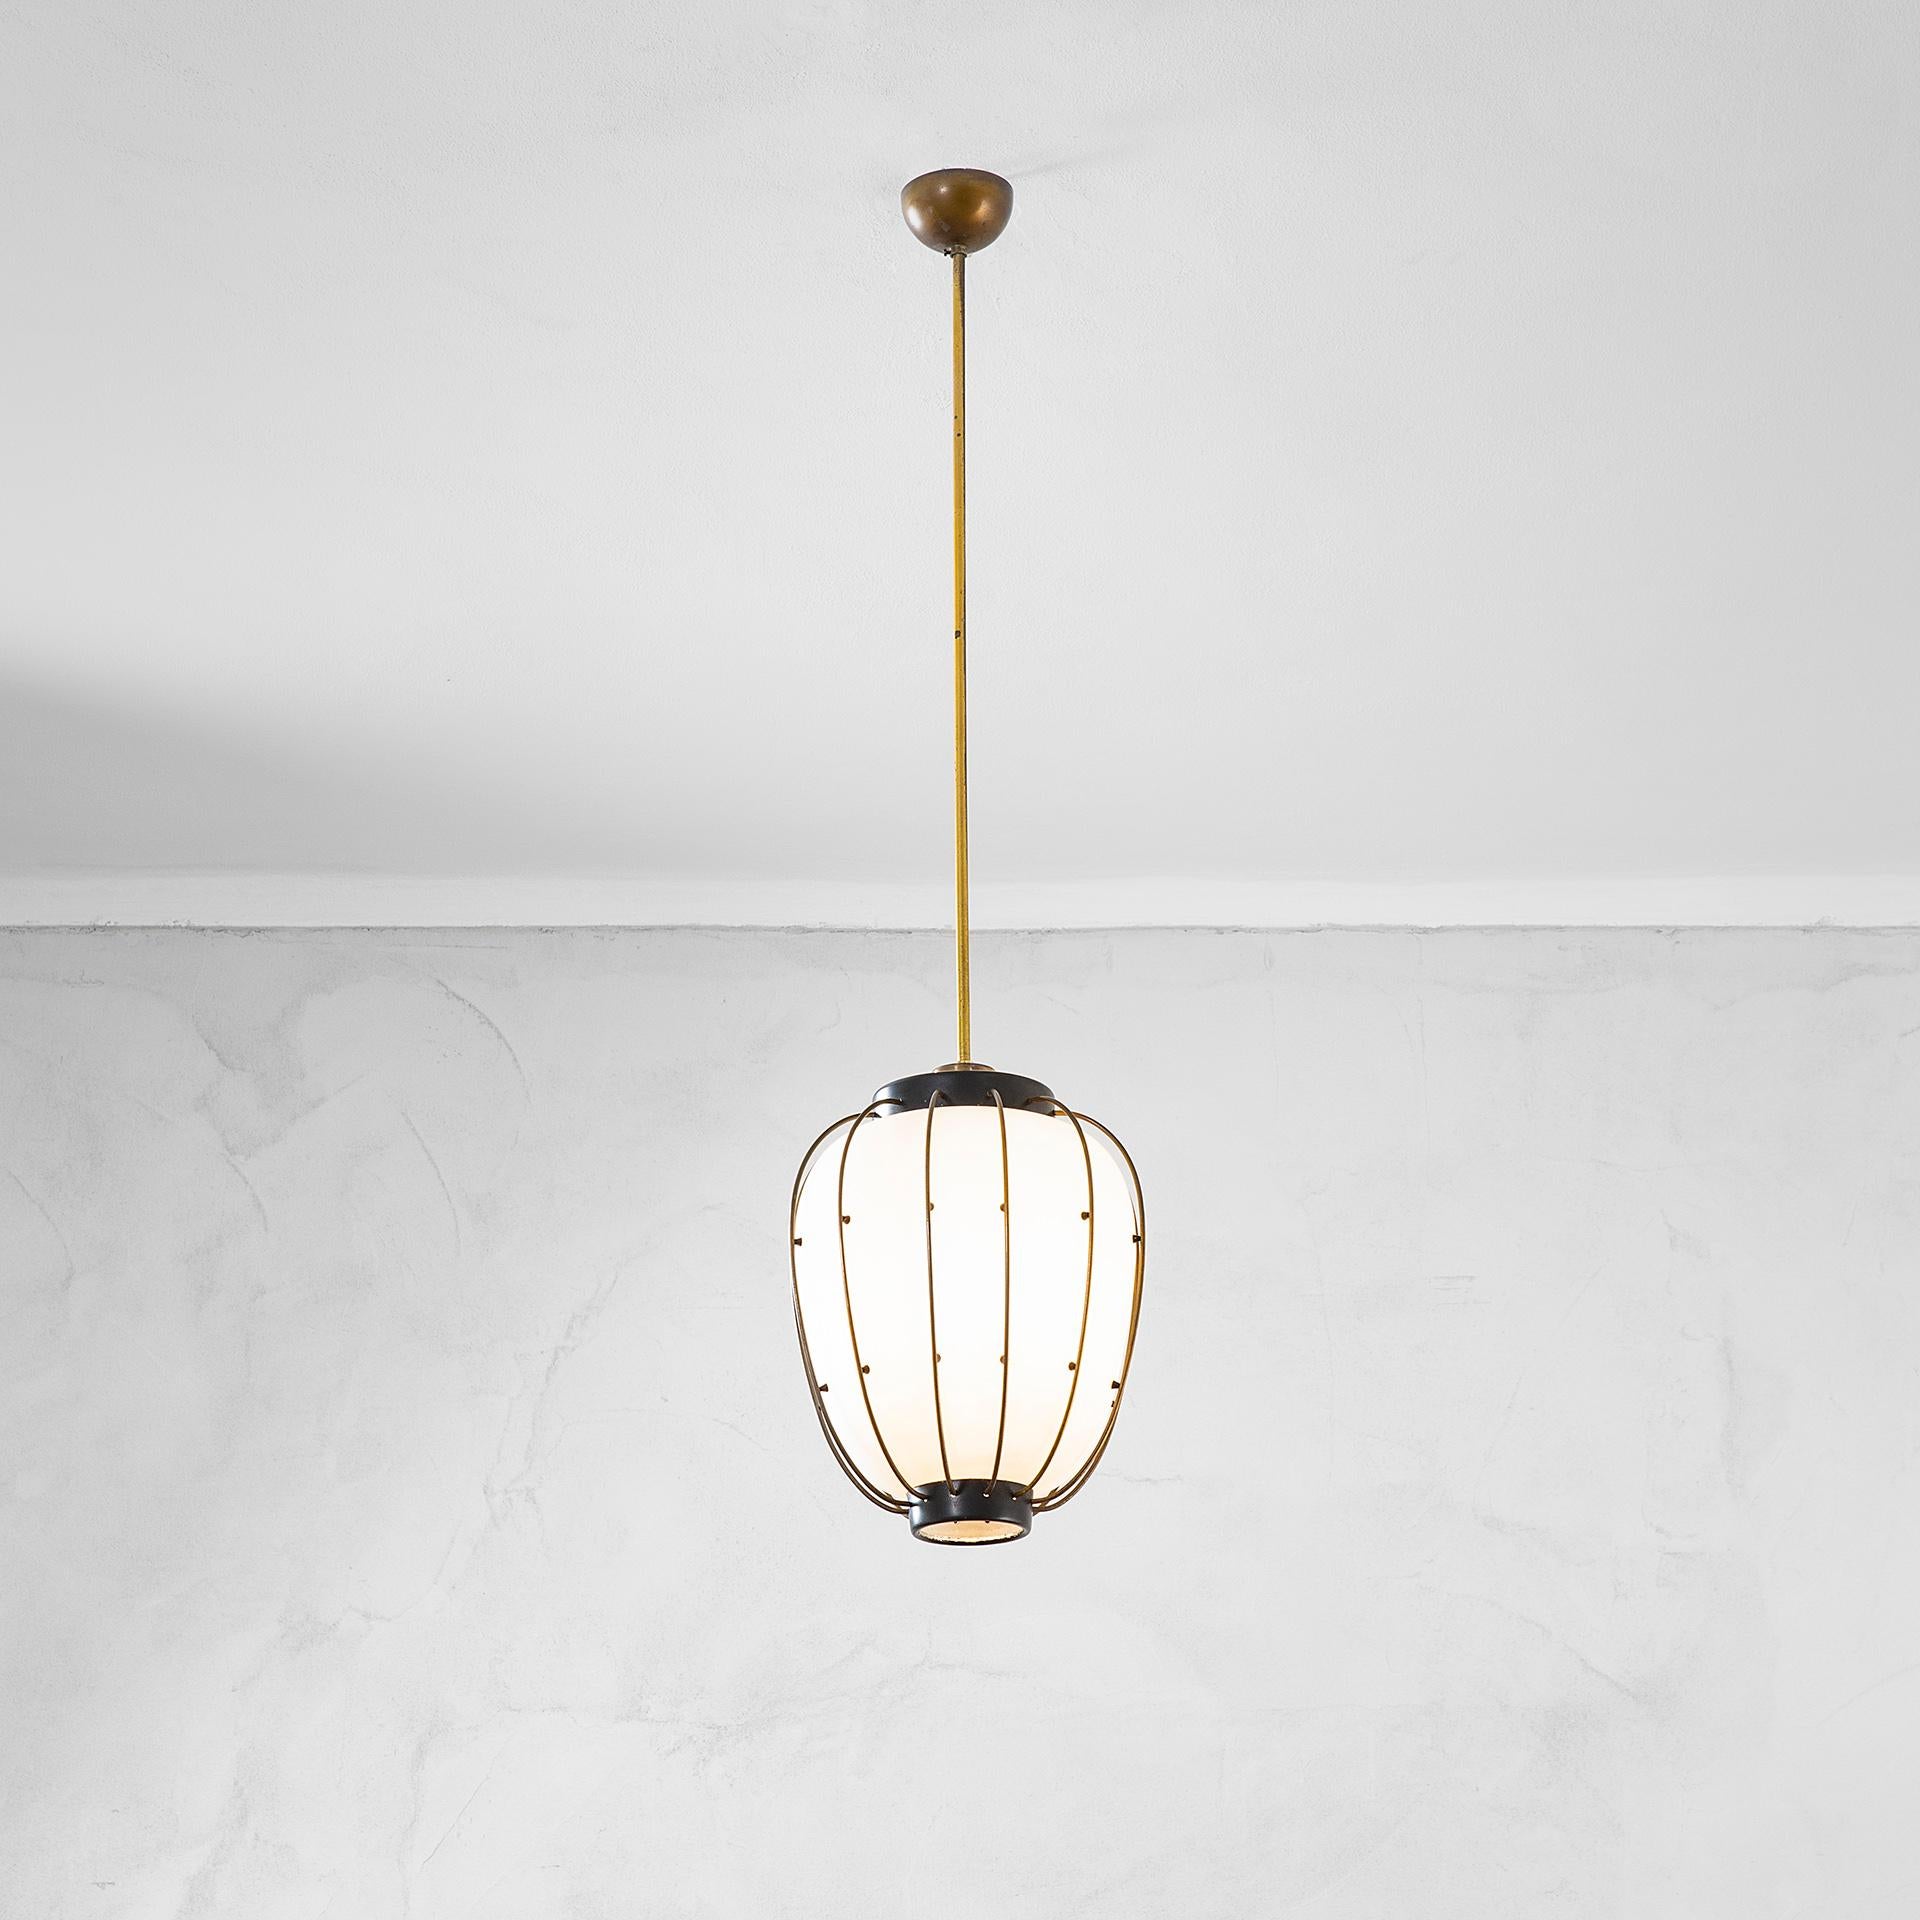 Stilnovo Chandelier designed in '50s. The chandelier has a brass structure, the diffuser is in opaline glass and then covered by brass slats. Perfect for entrance, dining room or living room.
Good condition, fully working.
The chandelier can de